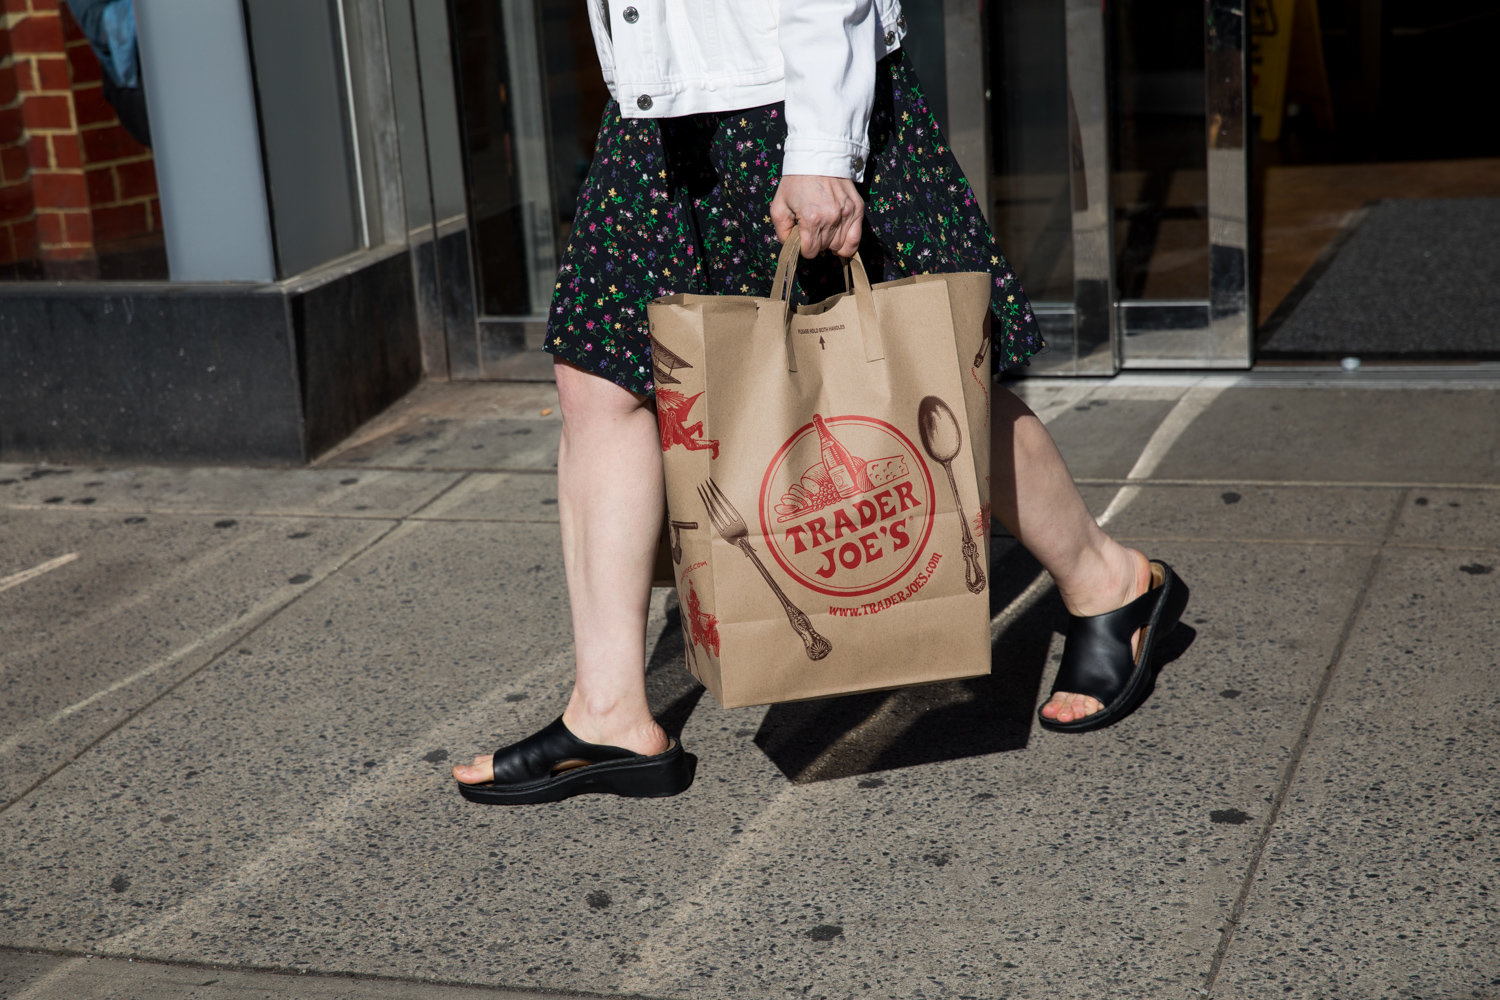 Trader Joe’s is in some ways the standard-bearer for high quality, durable paper bags. With the statewide plastic bag ban set to go into effect March 1, retailers will have to make the switch to paper bags, though they will not be of the same quality. Outlets like Trader Joe’s have contracts with manufacturers to produce their bags.